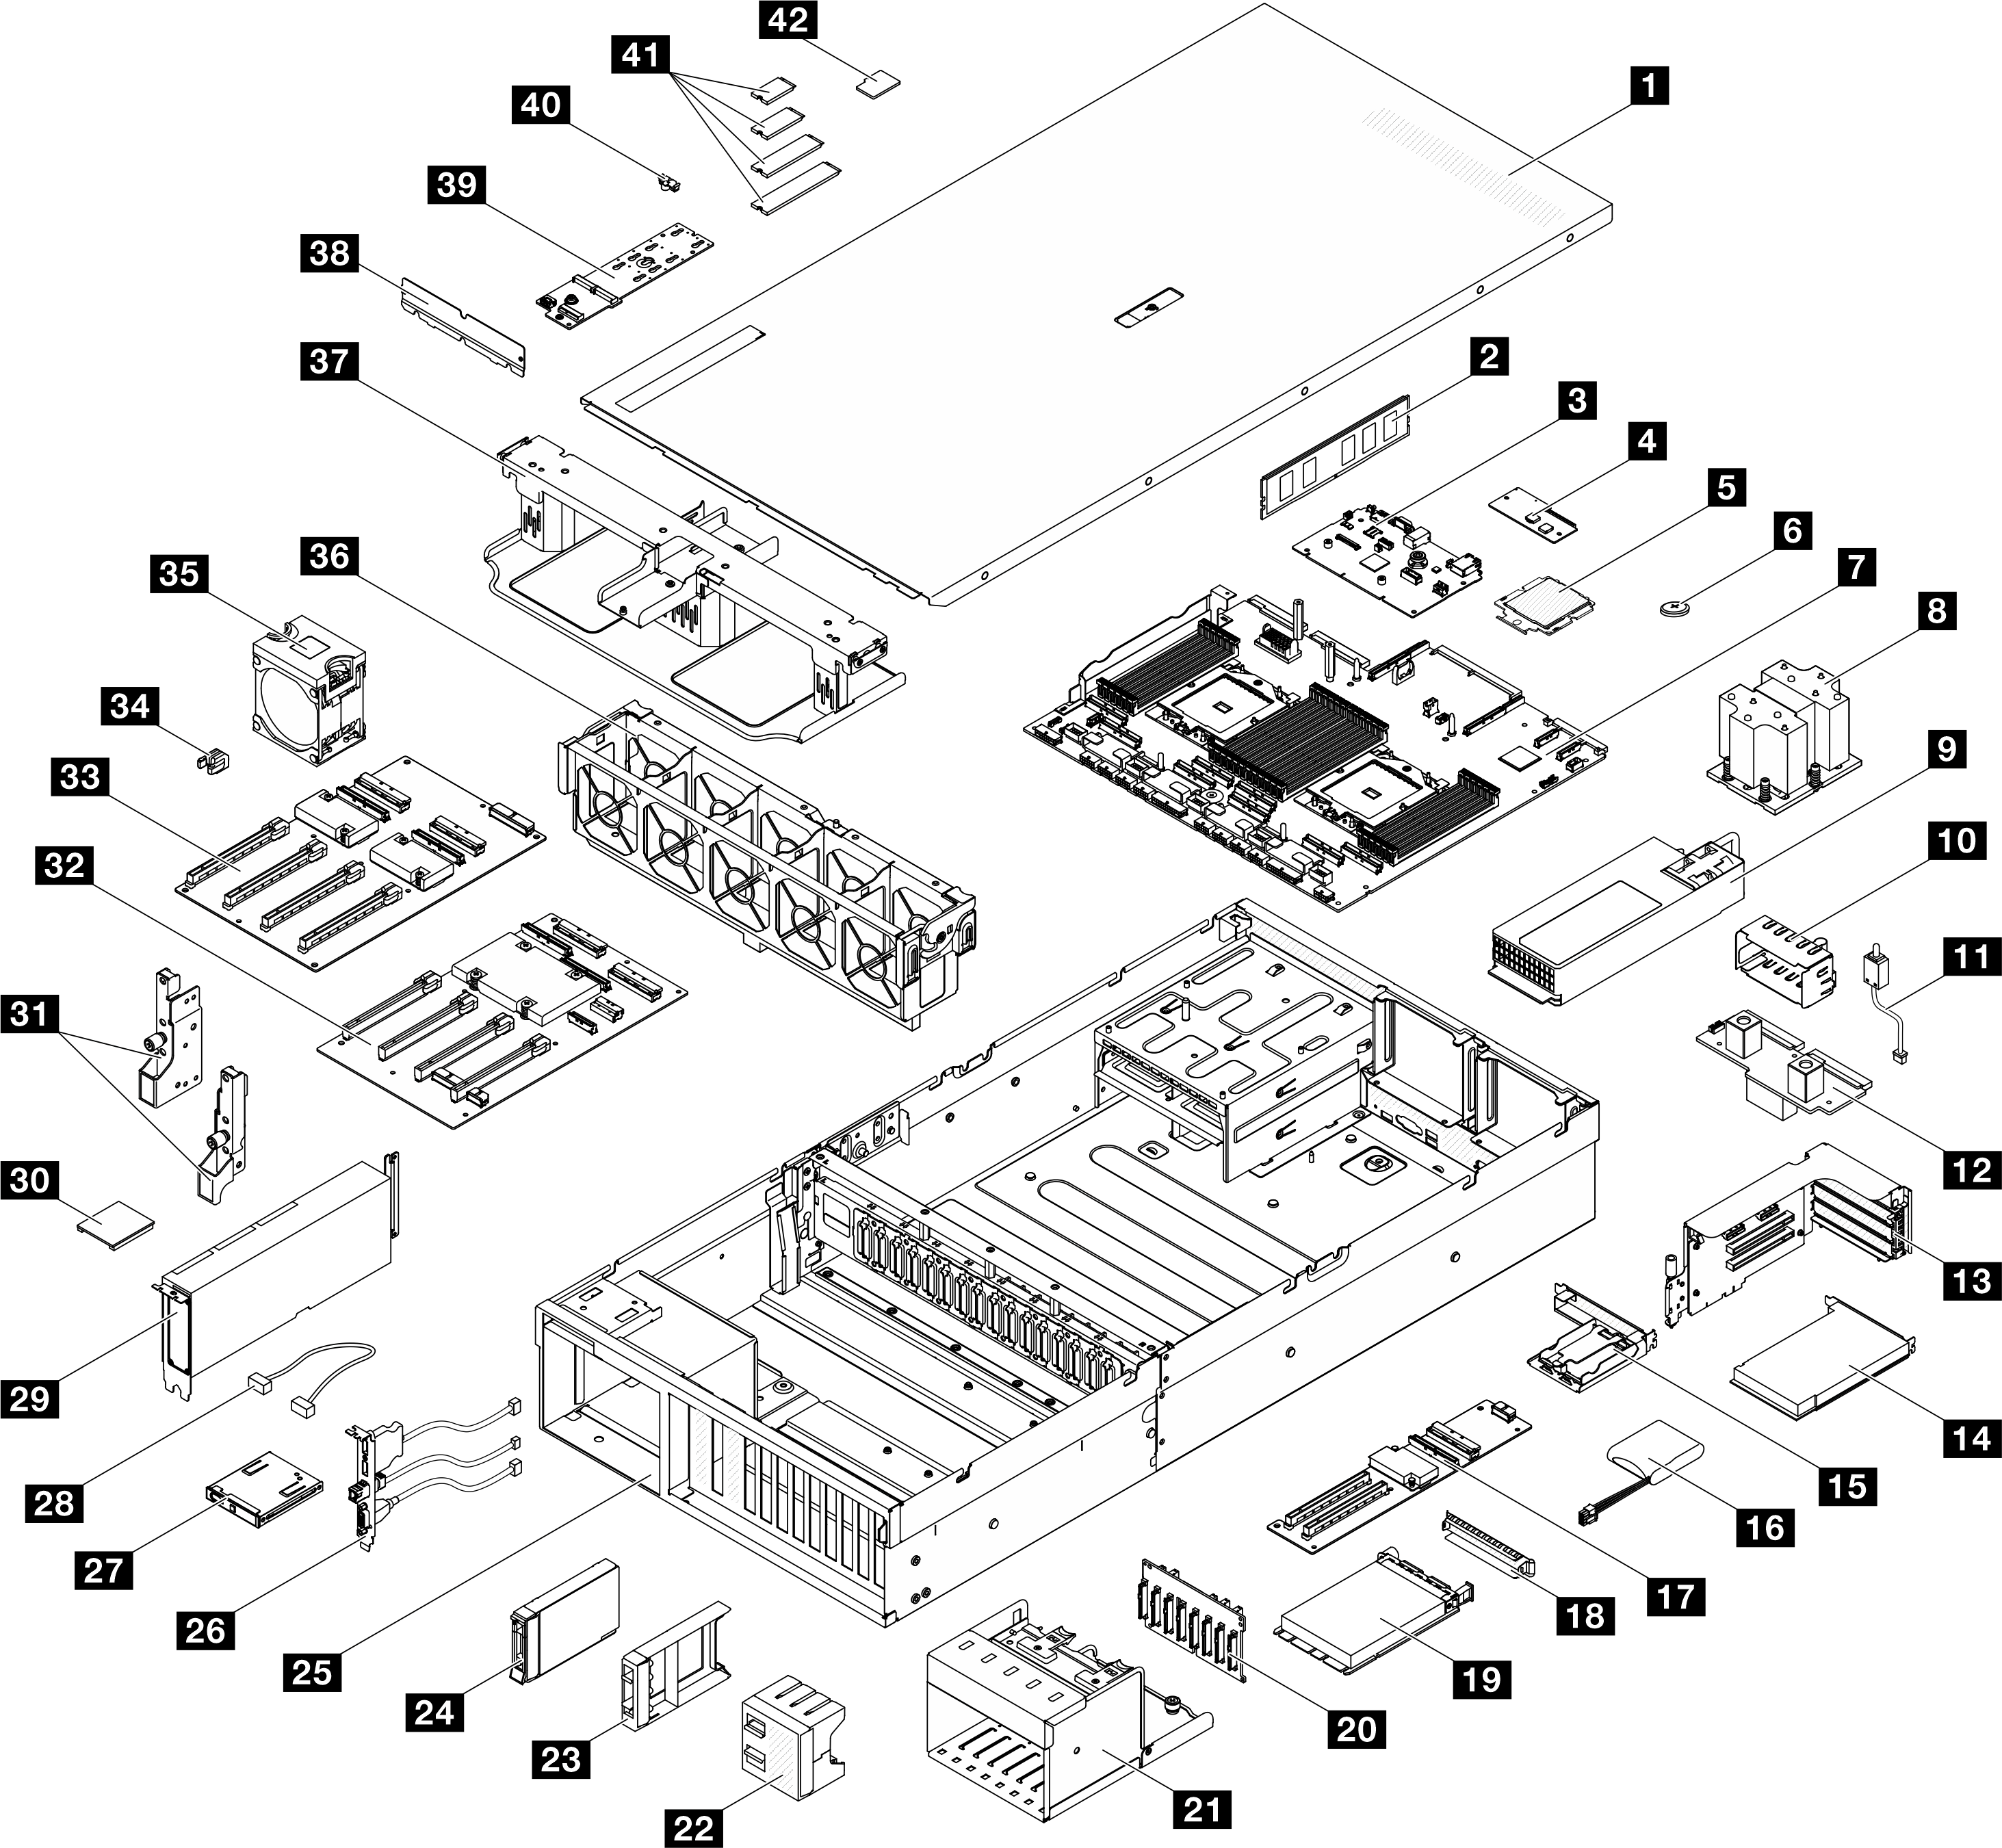 Server components of the 4-DW GPU-Modell